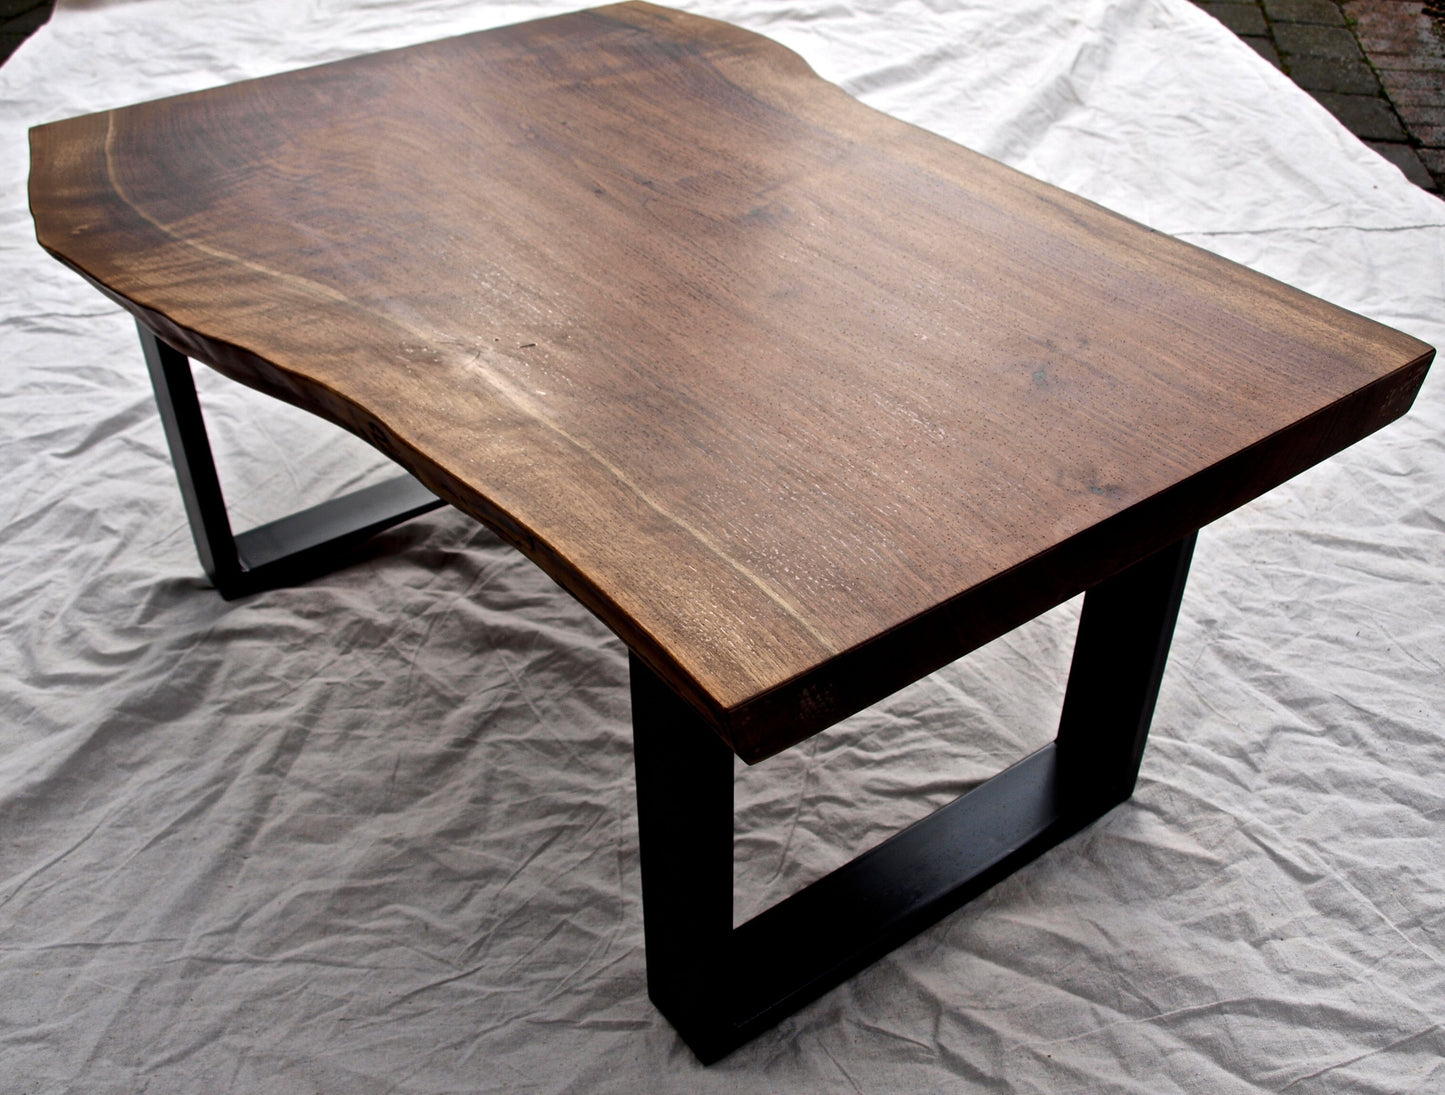 Live Edge Walnut Coffee Tables.  Build Your Own Solid Black Walnut Coffee Table, Side Table, Living Room Table